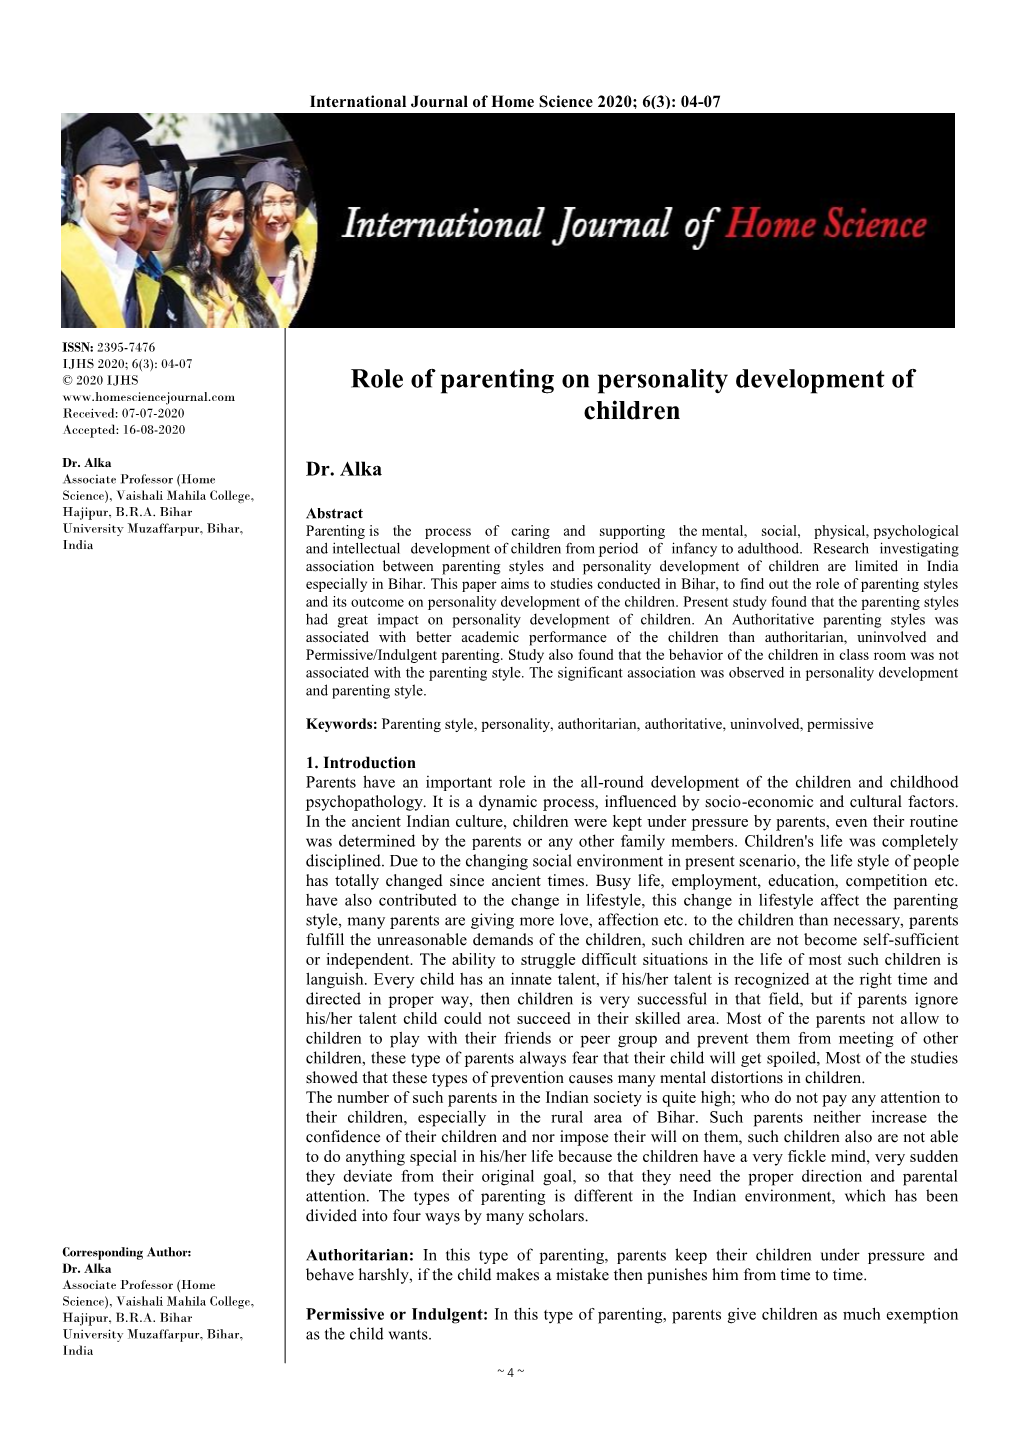 Role of Parenting on Personality Development of Children